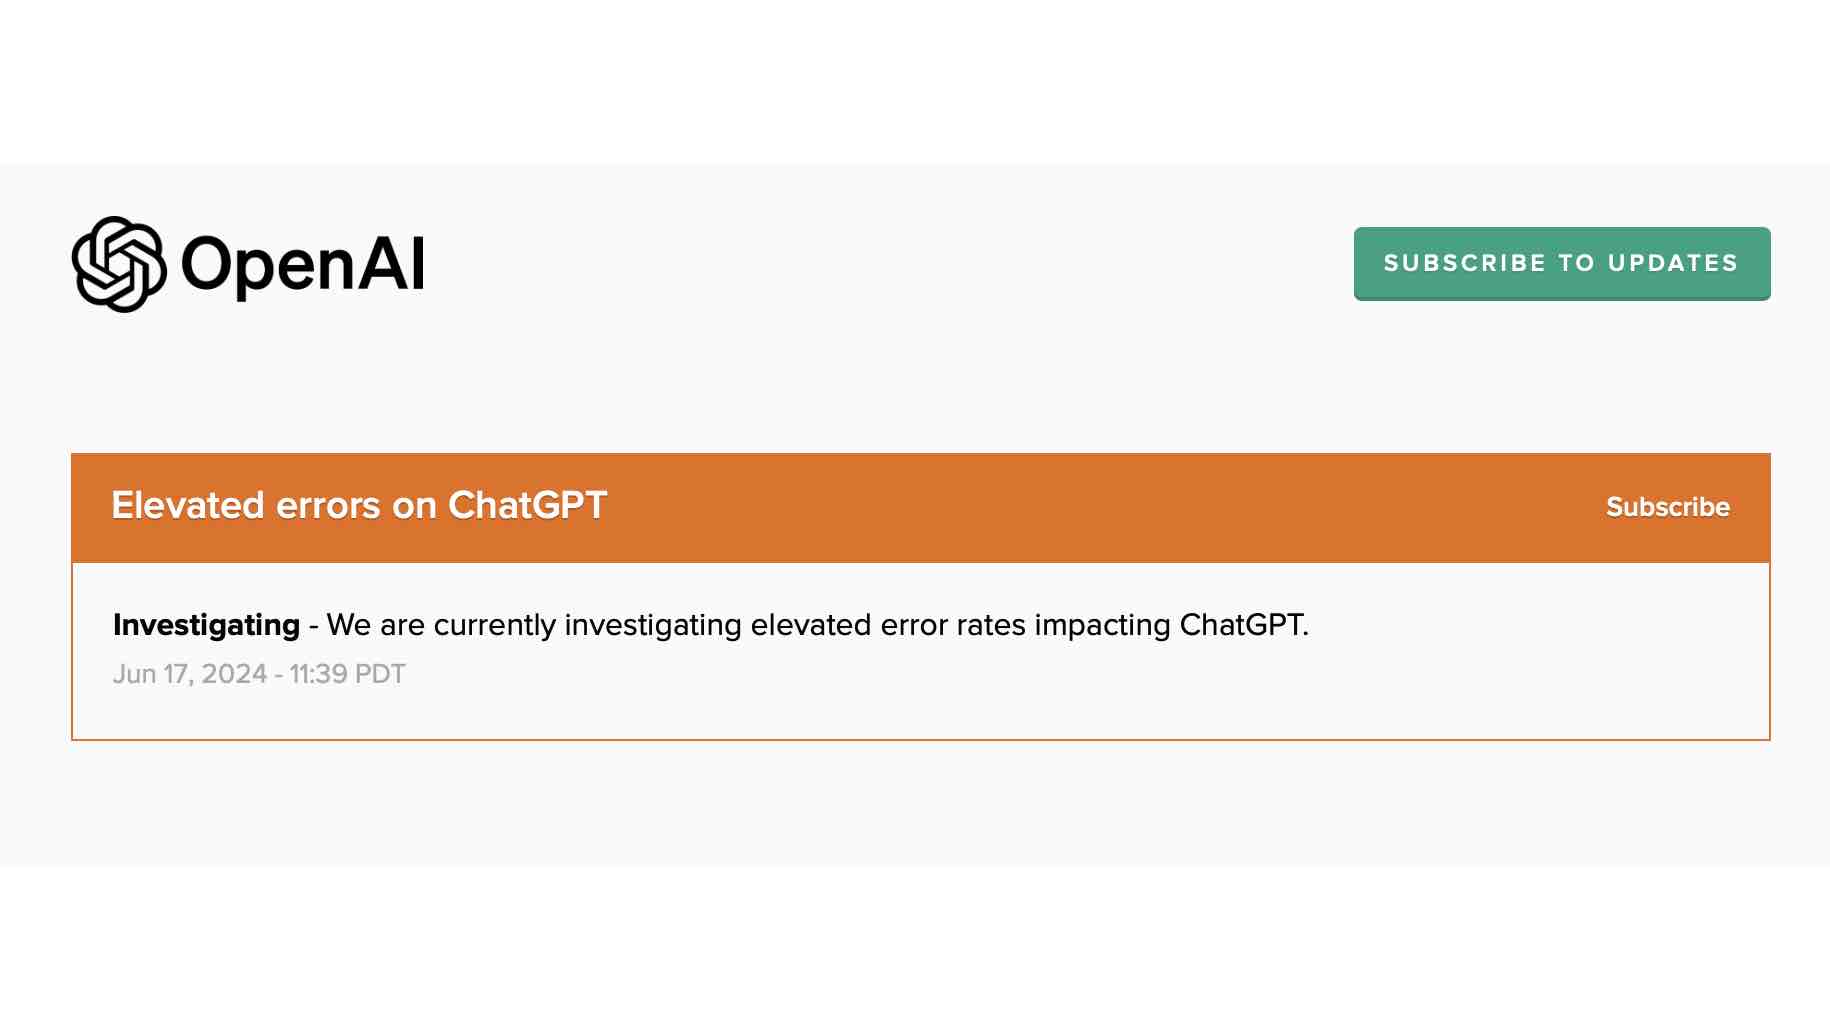 OpenAI reporting issues with ChatGPT on June 17 2024